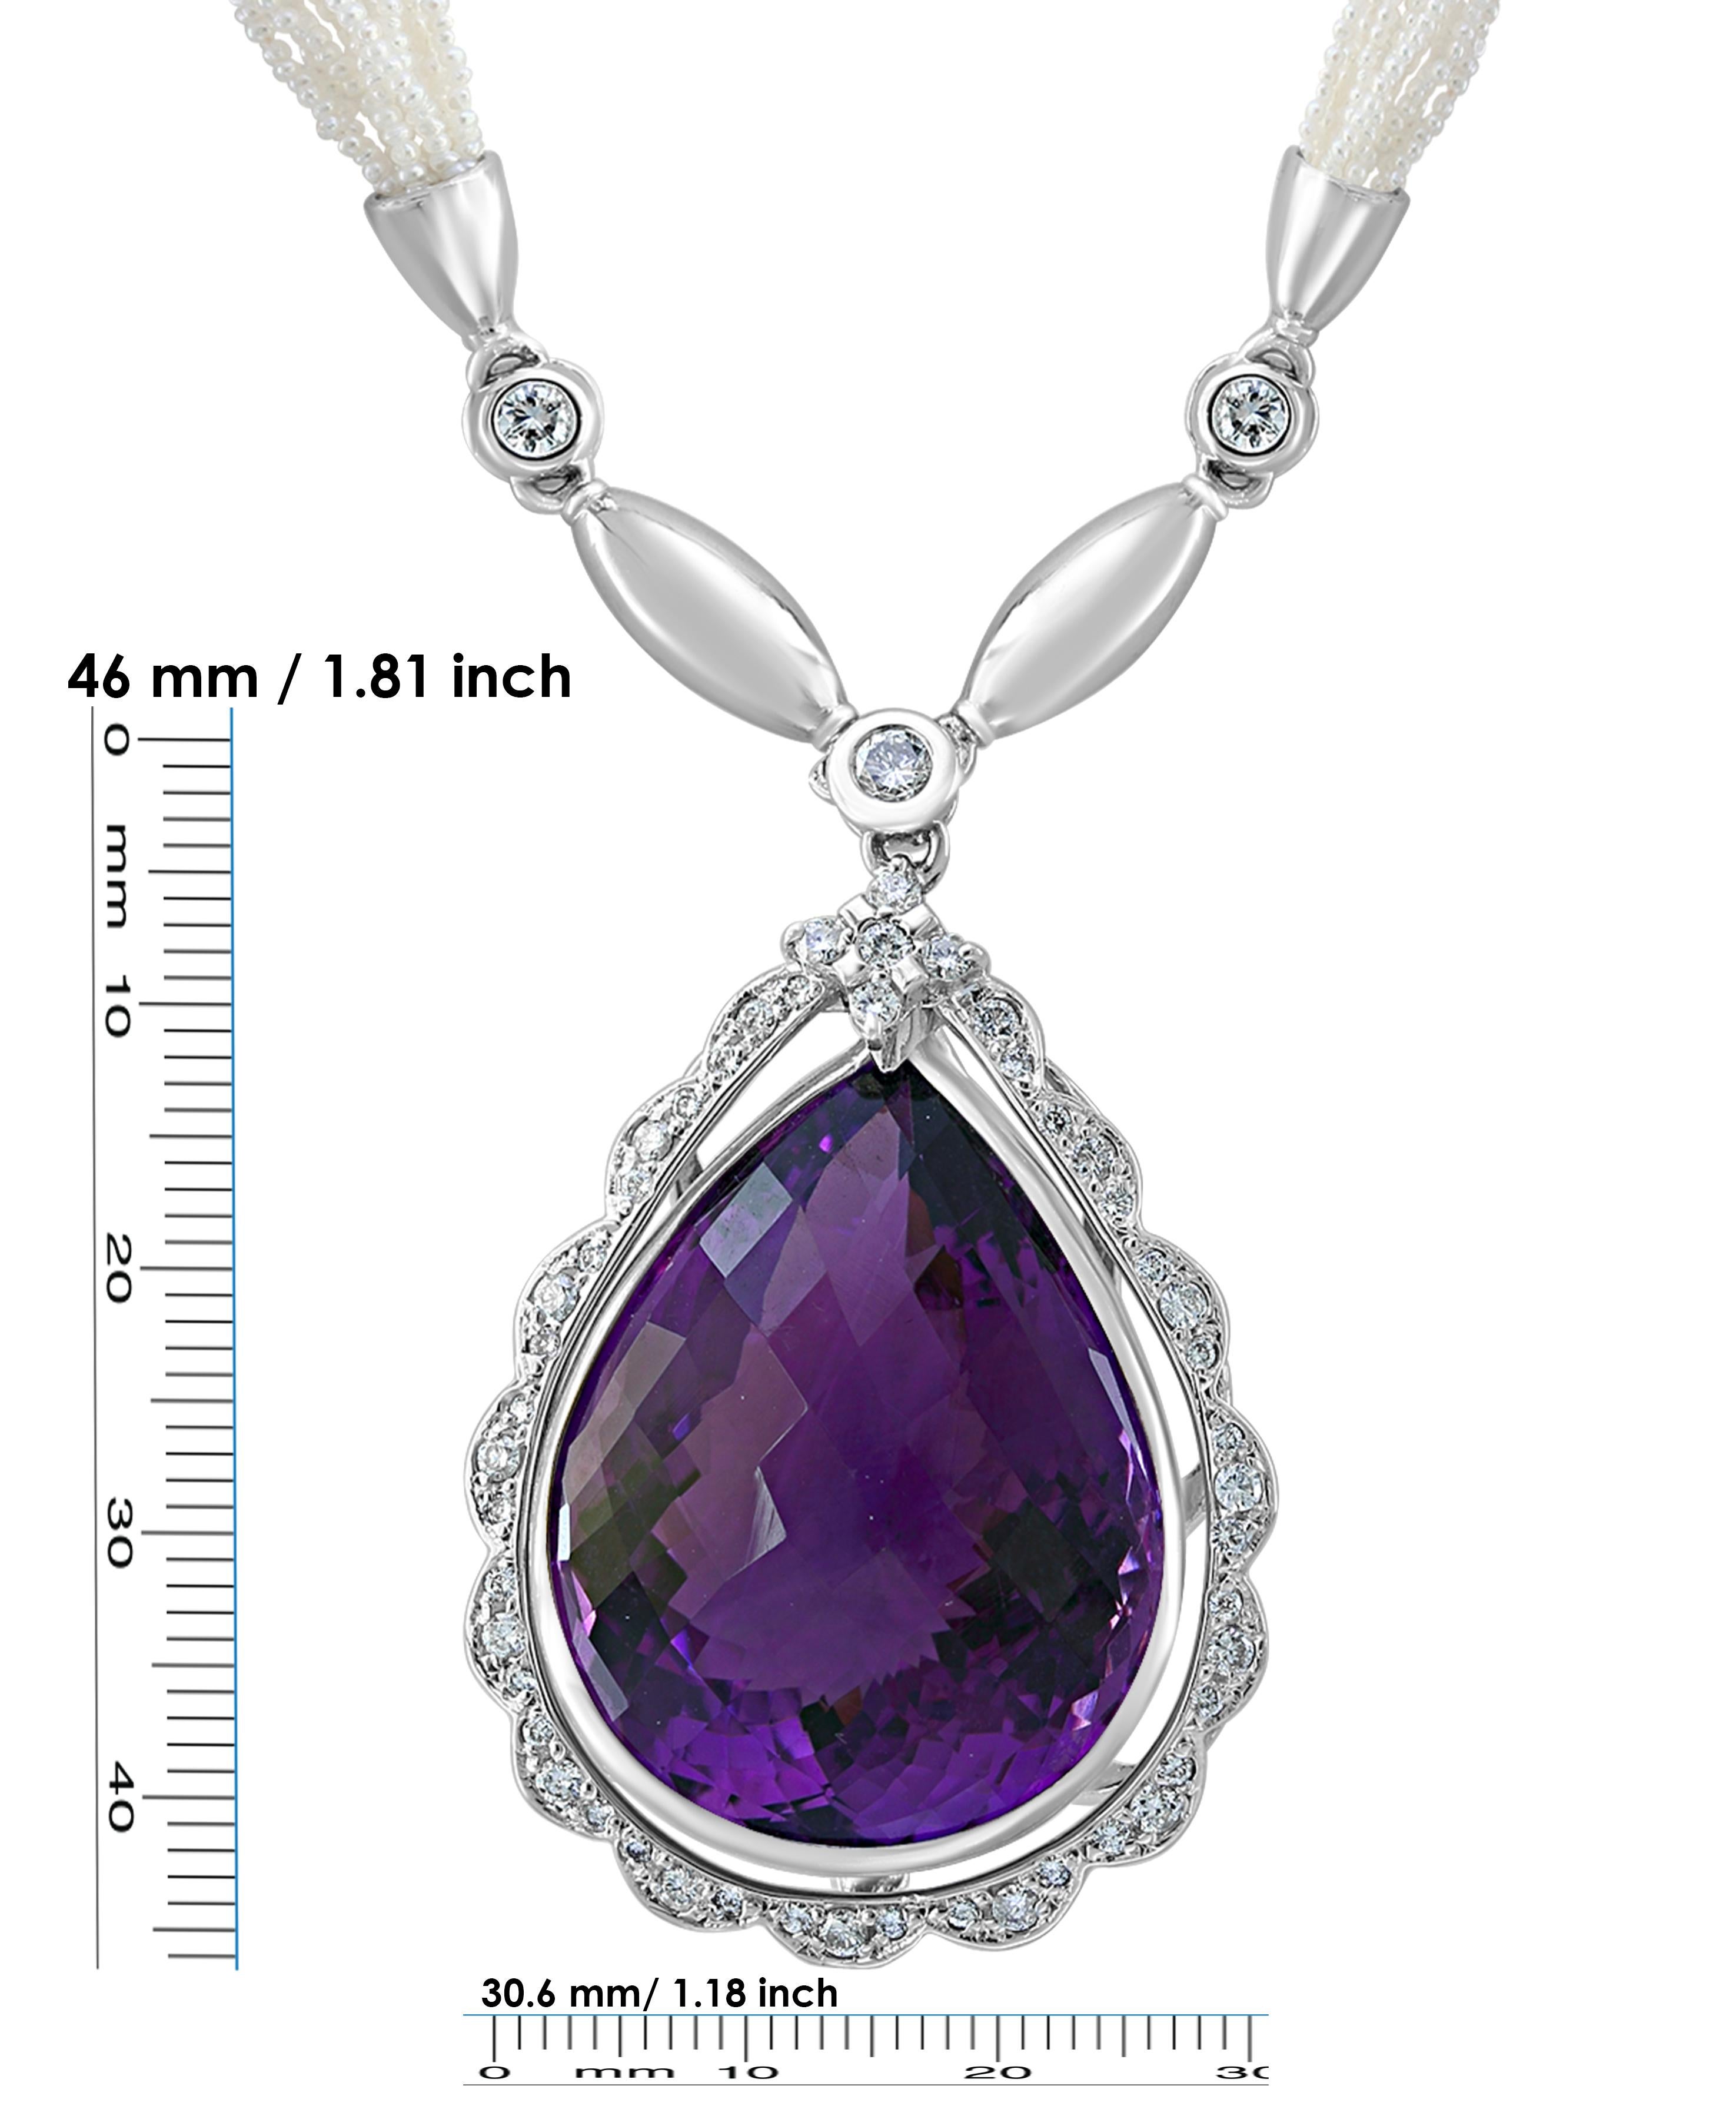 Women's 54 Carat Tear Drop Amethyst and Diamonds with Seed Pearl Necklace 18 Karat Gold For Sale